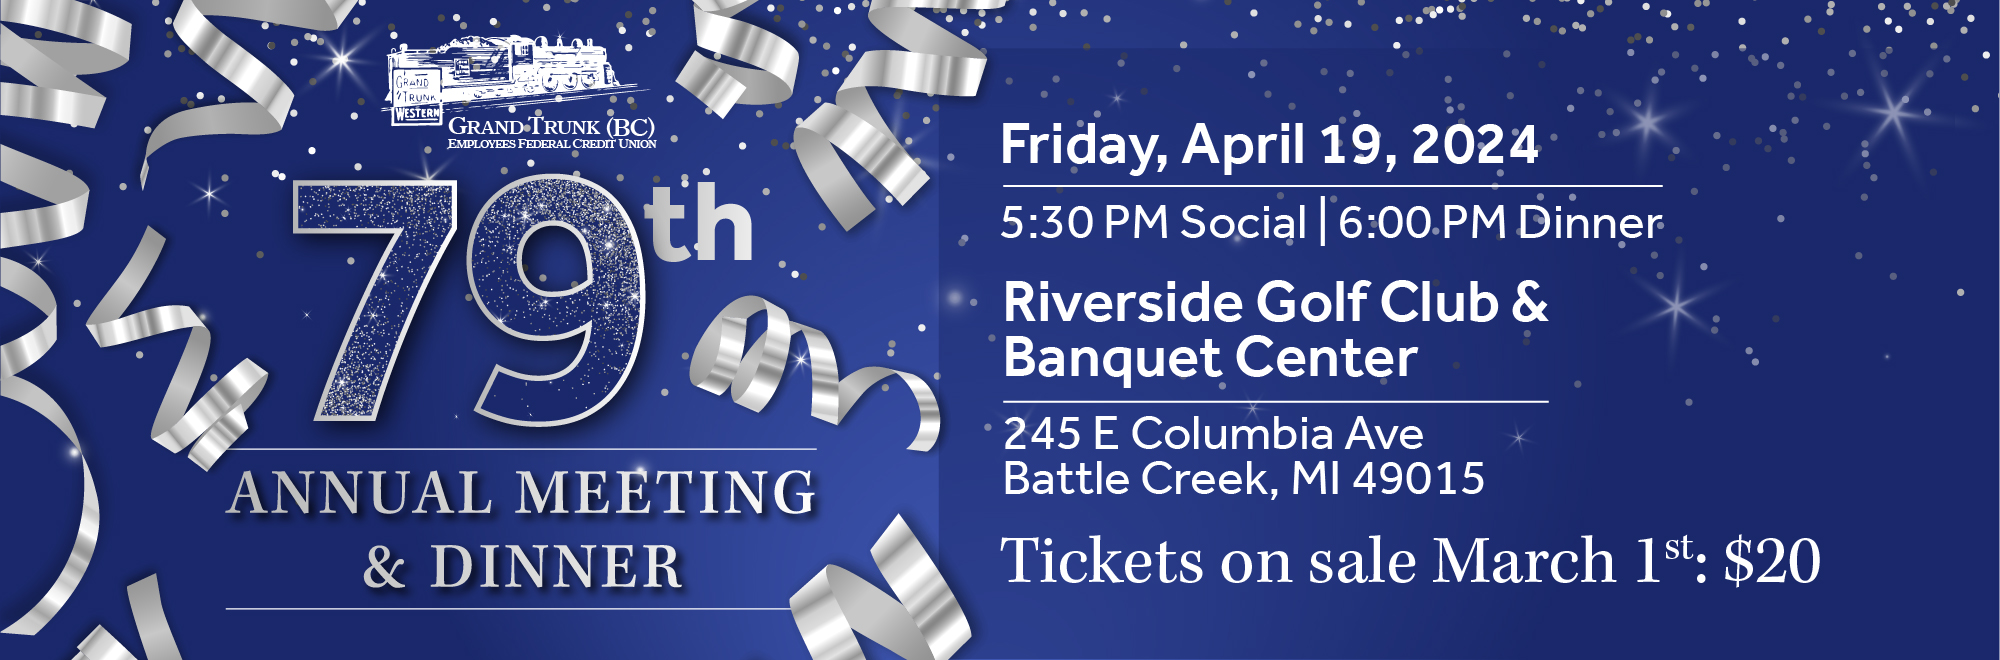 79th Annual Meeting & Dinner Friday April 19, 2024 at Riverside Golf Club & banquet center. Tickets on sale March 01, 2024.